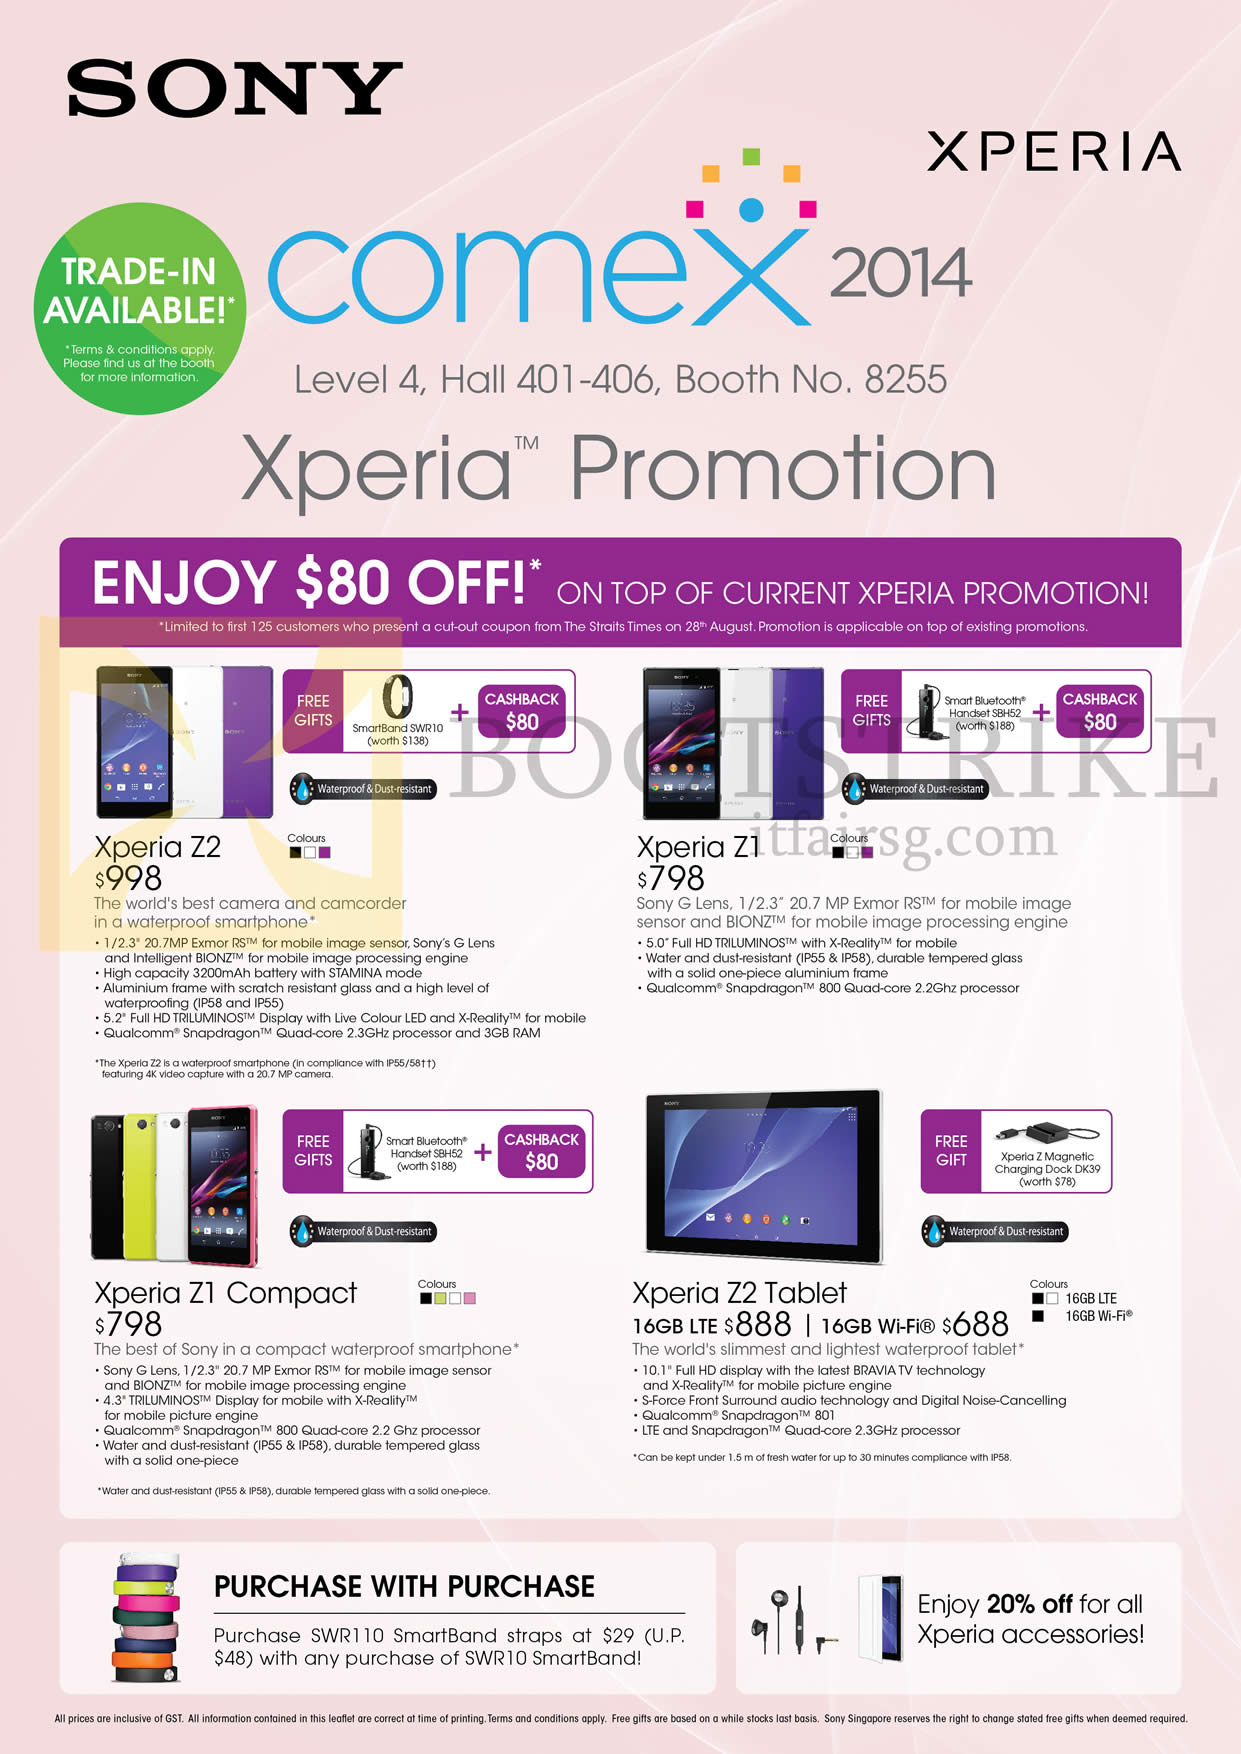 COMEX 2014 price list image brochure of Sony Mobile Phones Xperia Z2, Xperiz Z1, Xperia Z1 Compact, Xperia Z2 Tablet, Purchase With Purchase